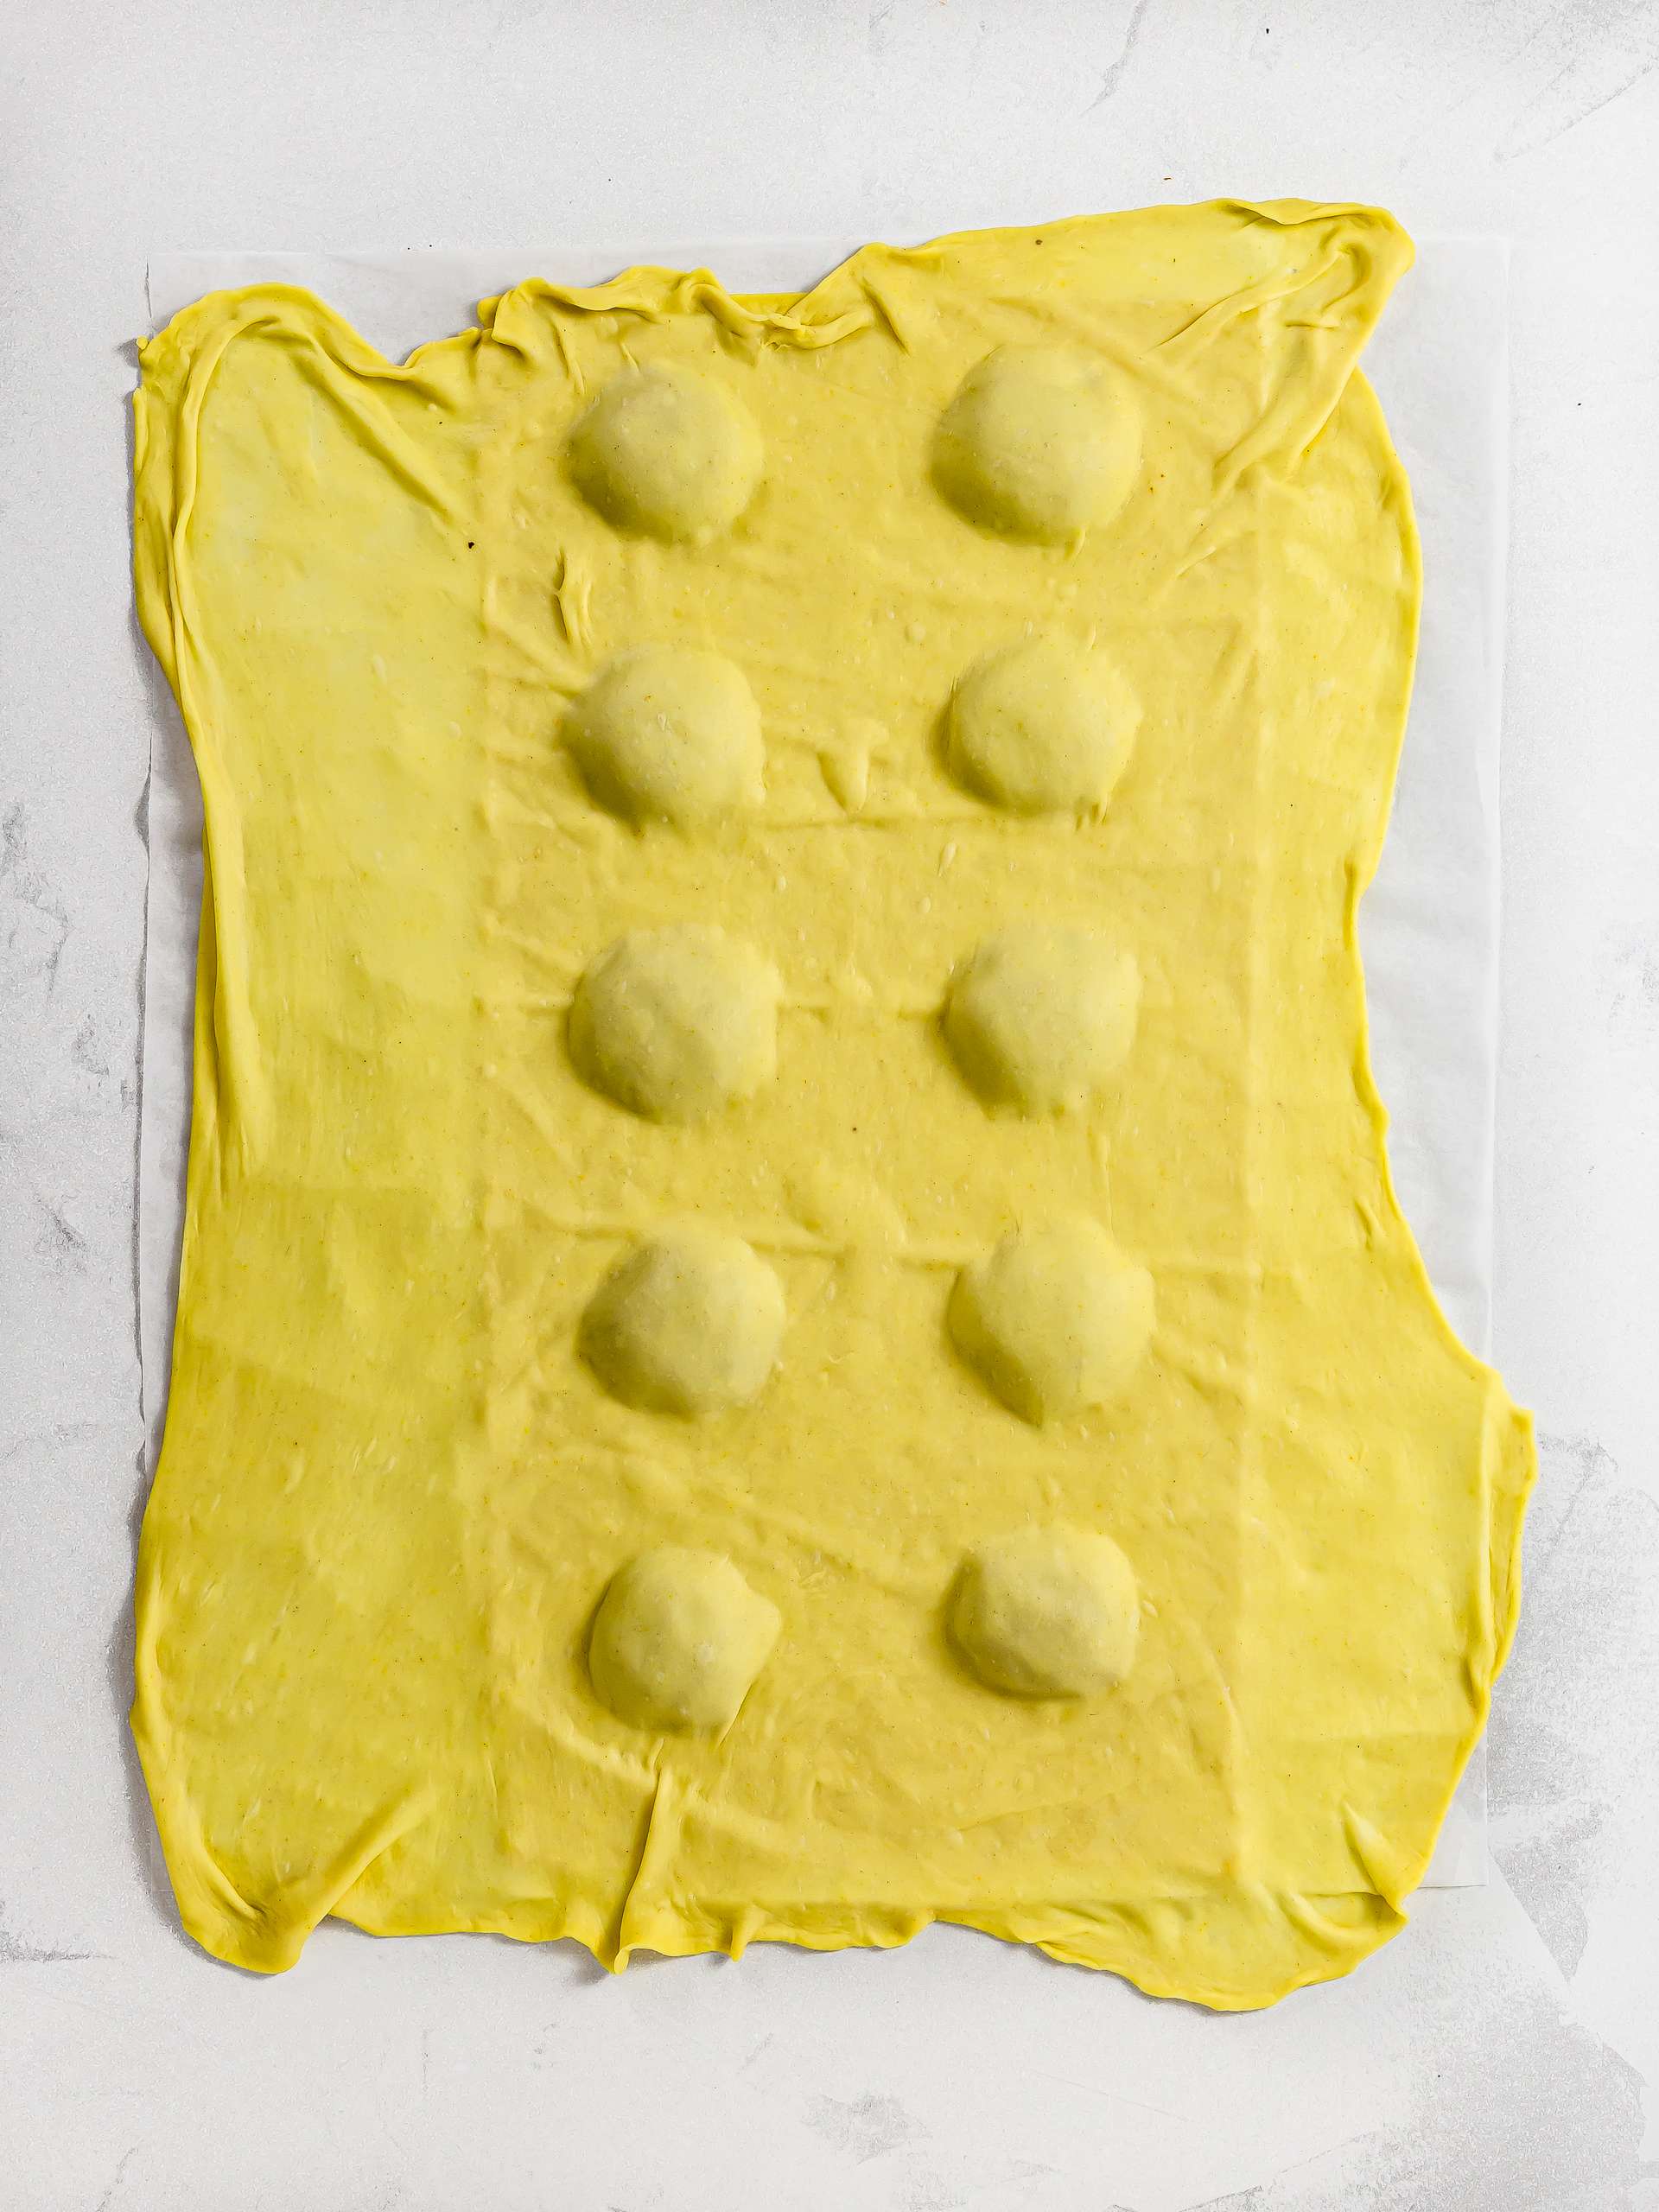 one sheet of pasta dough draped over another sheet with ravioli filling